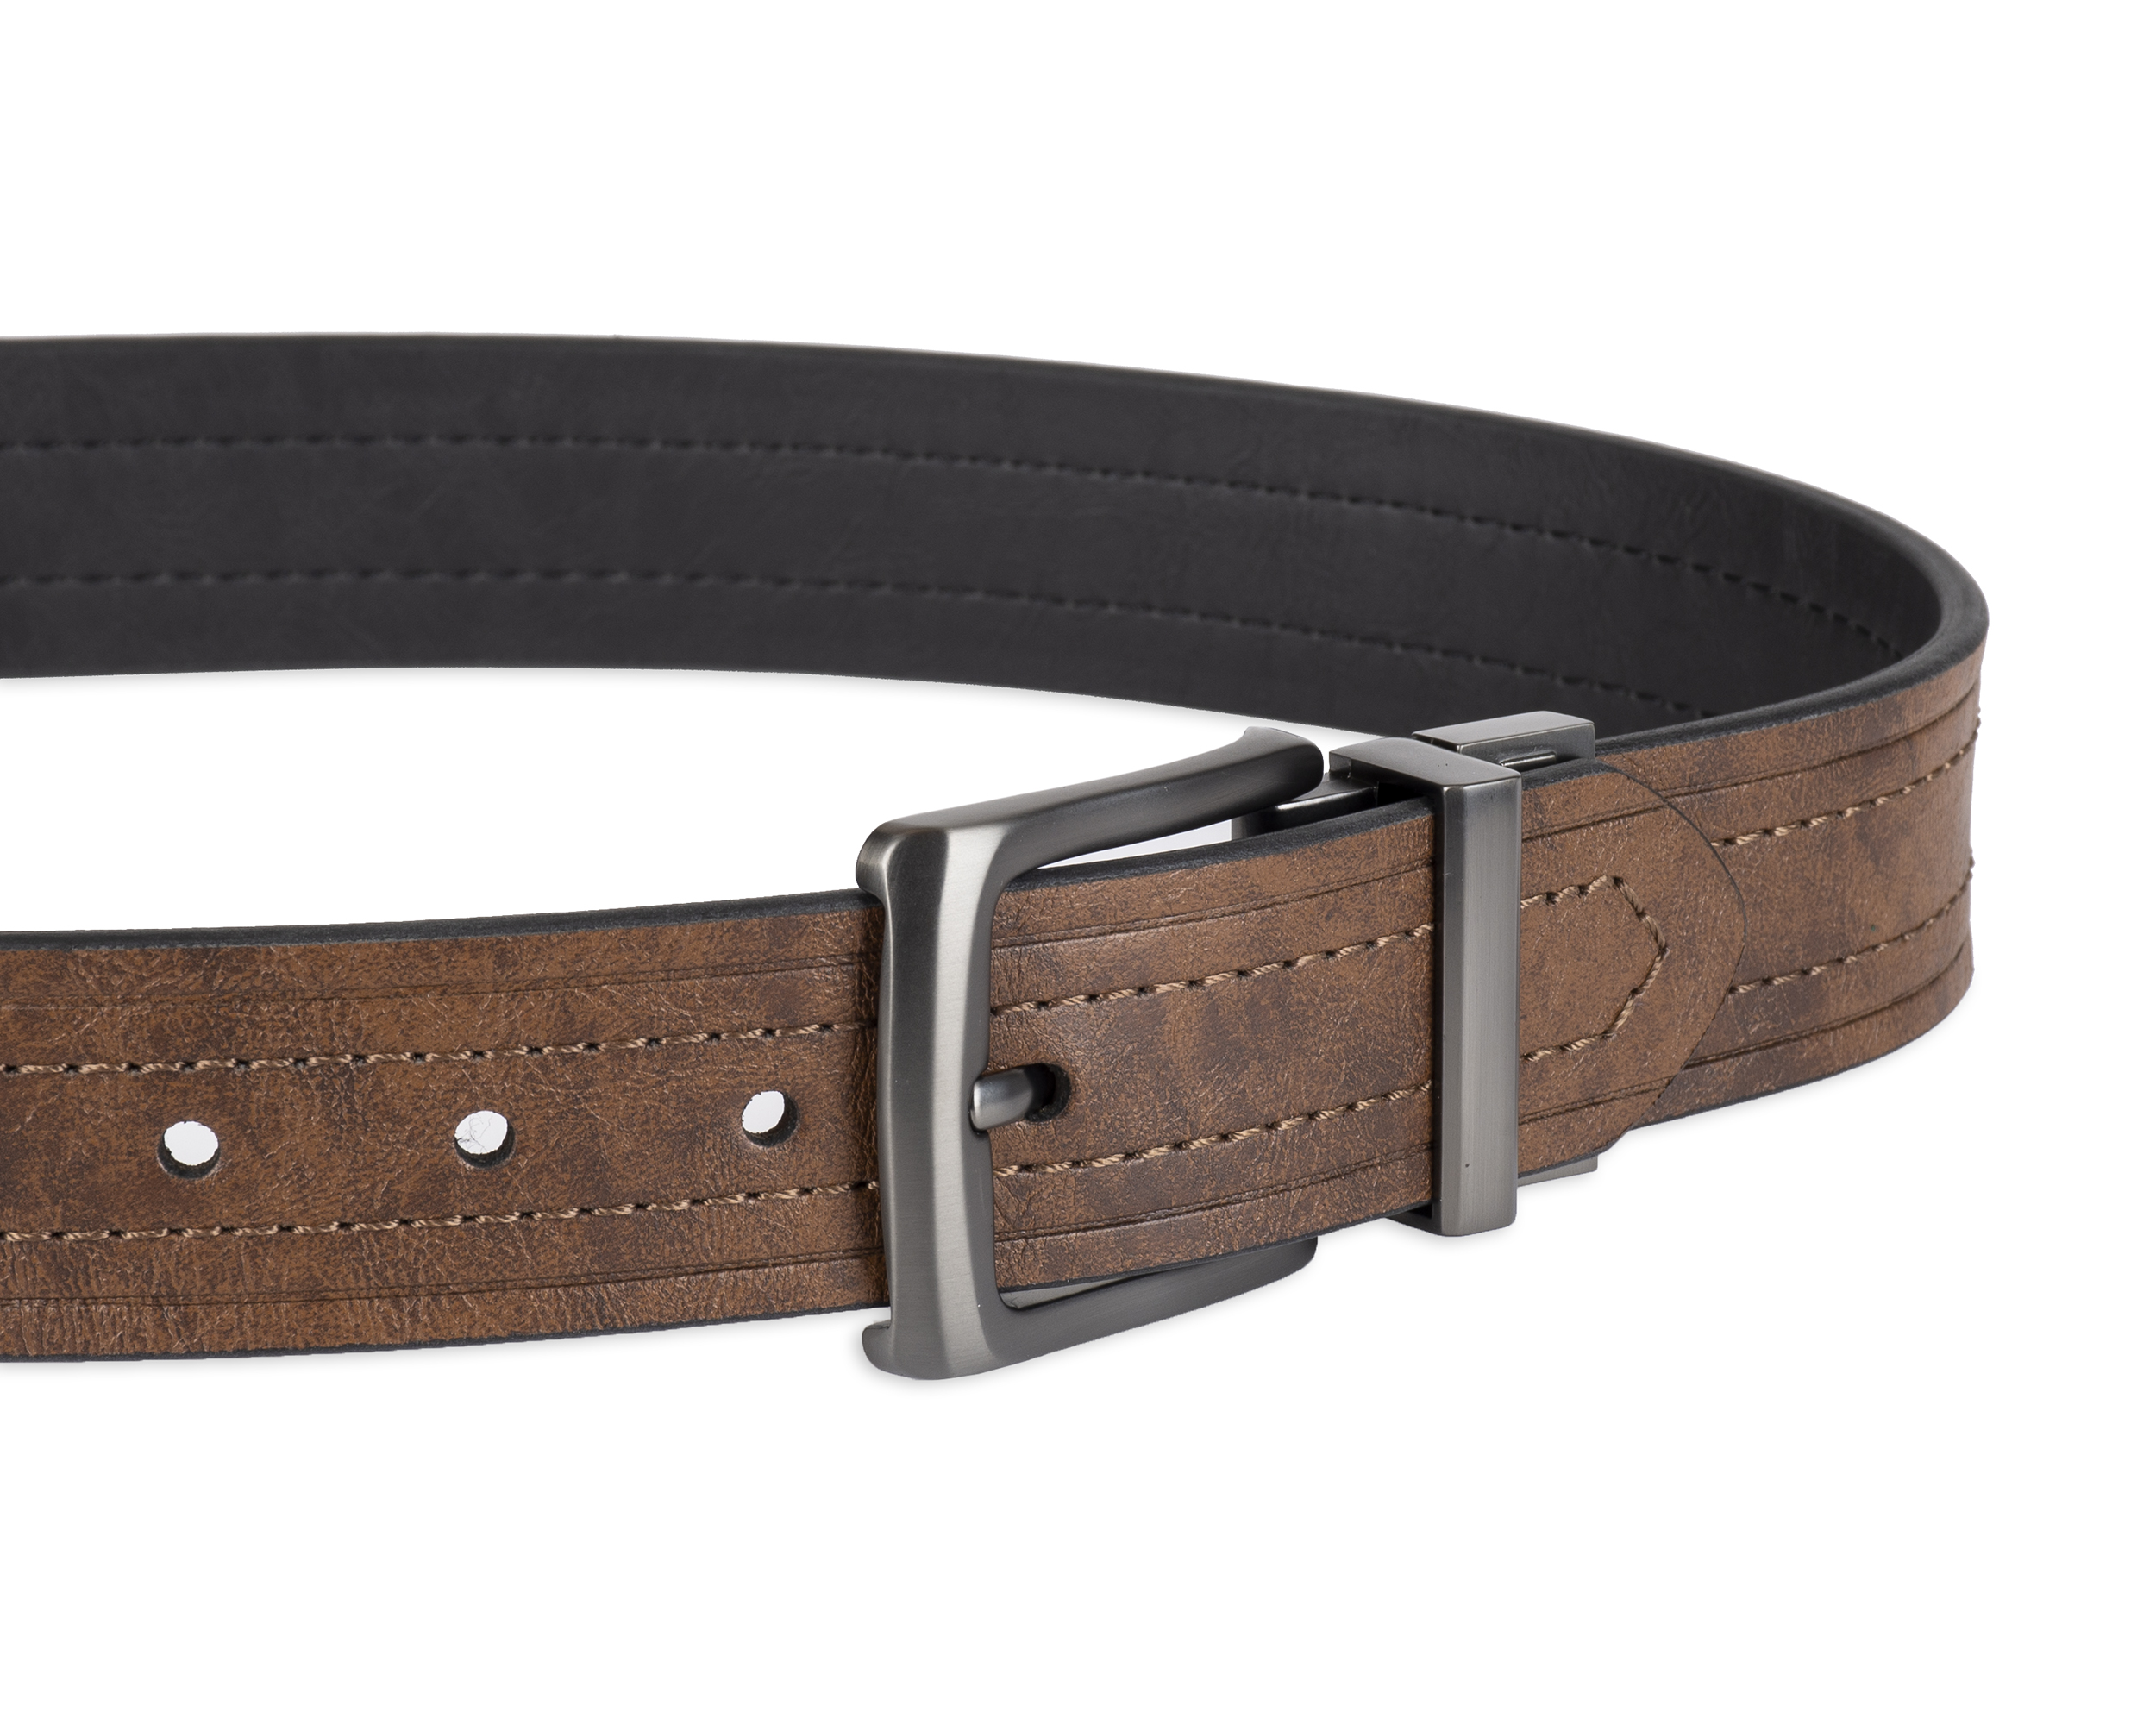 Levi's Men's Two-in-One Reversible Casual Belt, Brown/Black - image 4 of 8